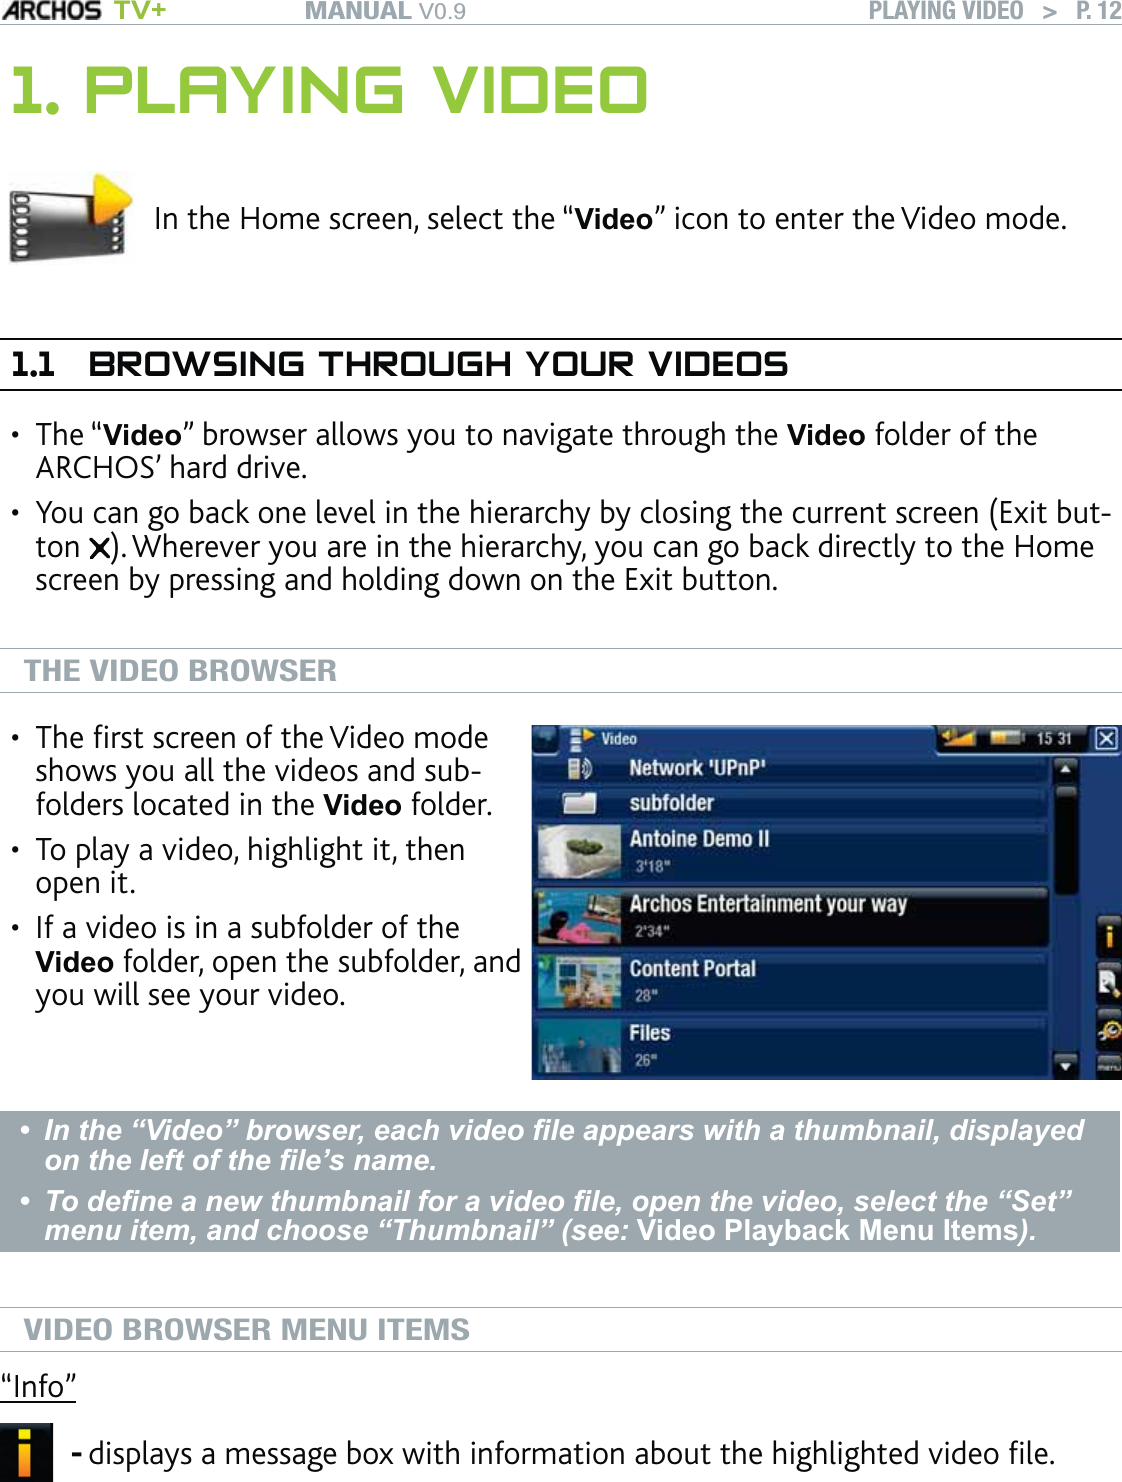 MANUAL V0.9 TV+ PLAYING VIDEO   &gt;   P. 121. PLAYING VIDEOIn the Home screen, select the “Video” icon to enter the Video mode.1.1  BROWSING THROUGH YOUR VIDEOSThe “Video” browser allows you to navigate through the Video folder of the ARCHOS’ hard drive. You can go back one level in the hierarchy by closing the current screen (Exit but-ton  ). Wherever you are in the hierarchy, you can go back directly to the Home screen by pressing and holding down on the Exit button.  THE VIDEO BROWSERThe ﬁrst screen of the Video mode shows you all the videos and sub-folders located in the Video folder. To play a video, highlight it, then open it. If a video is in a subfolder of the Video folder, open the subfolder, and you will see your video.•••In the “Video” browser, each video ﬁle appears with a thumbnail, displayed on the left of the ﬁle’s name. To deﬁne a new thumbnail for a video ﬁle, open the video, select the “Set” menu item, and choose “Thumbnail” (see: Video Playback Menu Items). ••VIDEO BROWSER MENU ITEMS“Info”displays a message box with information about the highlighted video ﬁle.-••